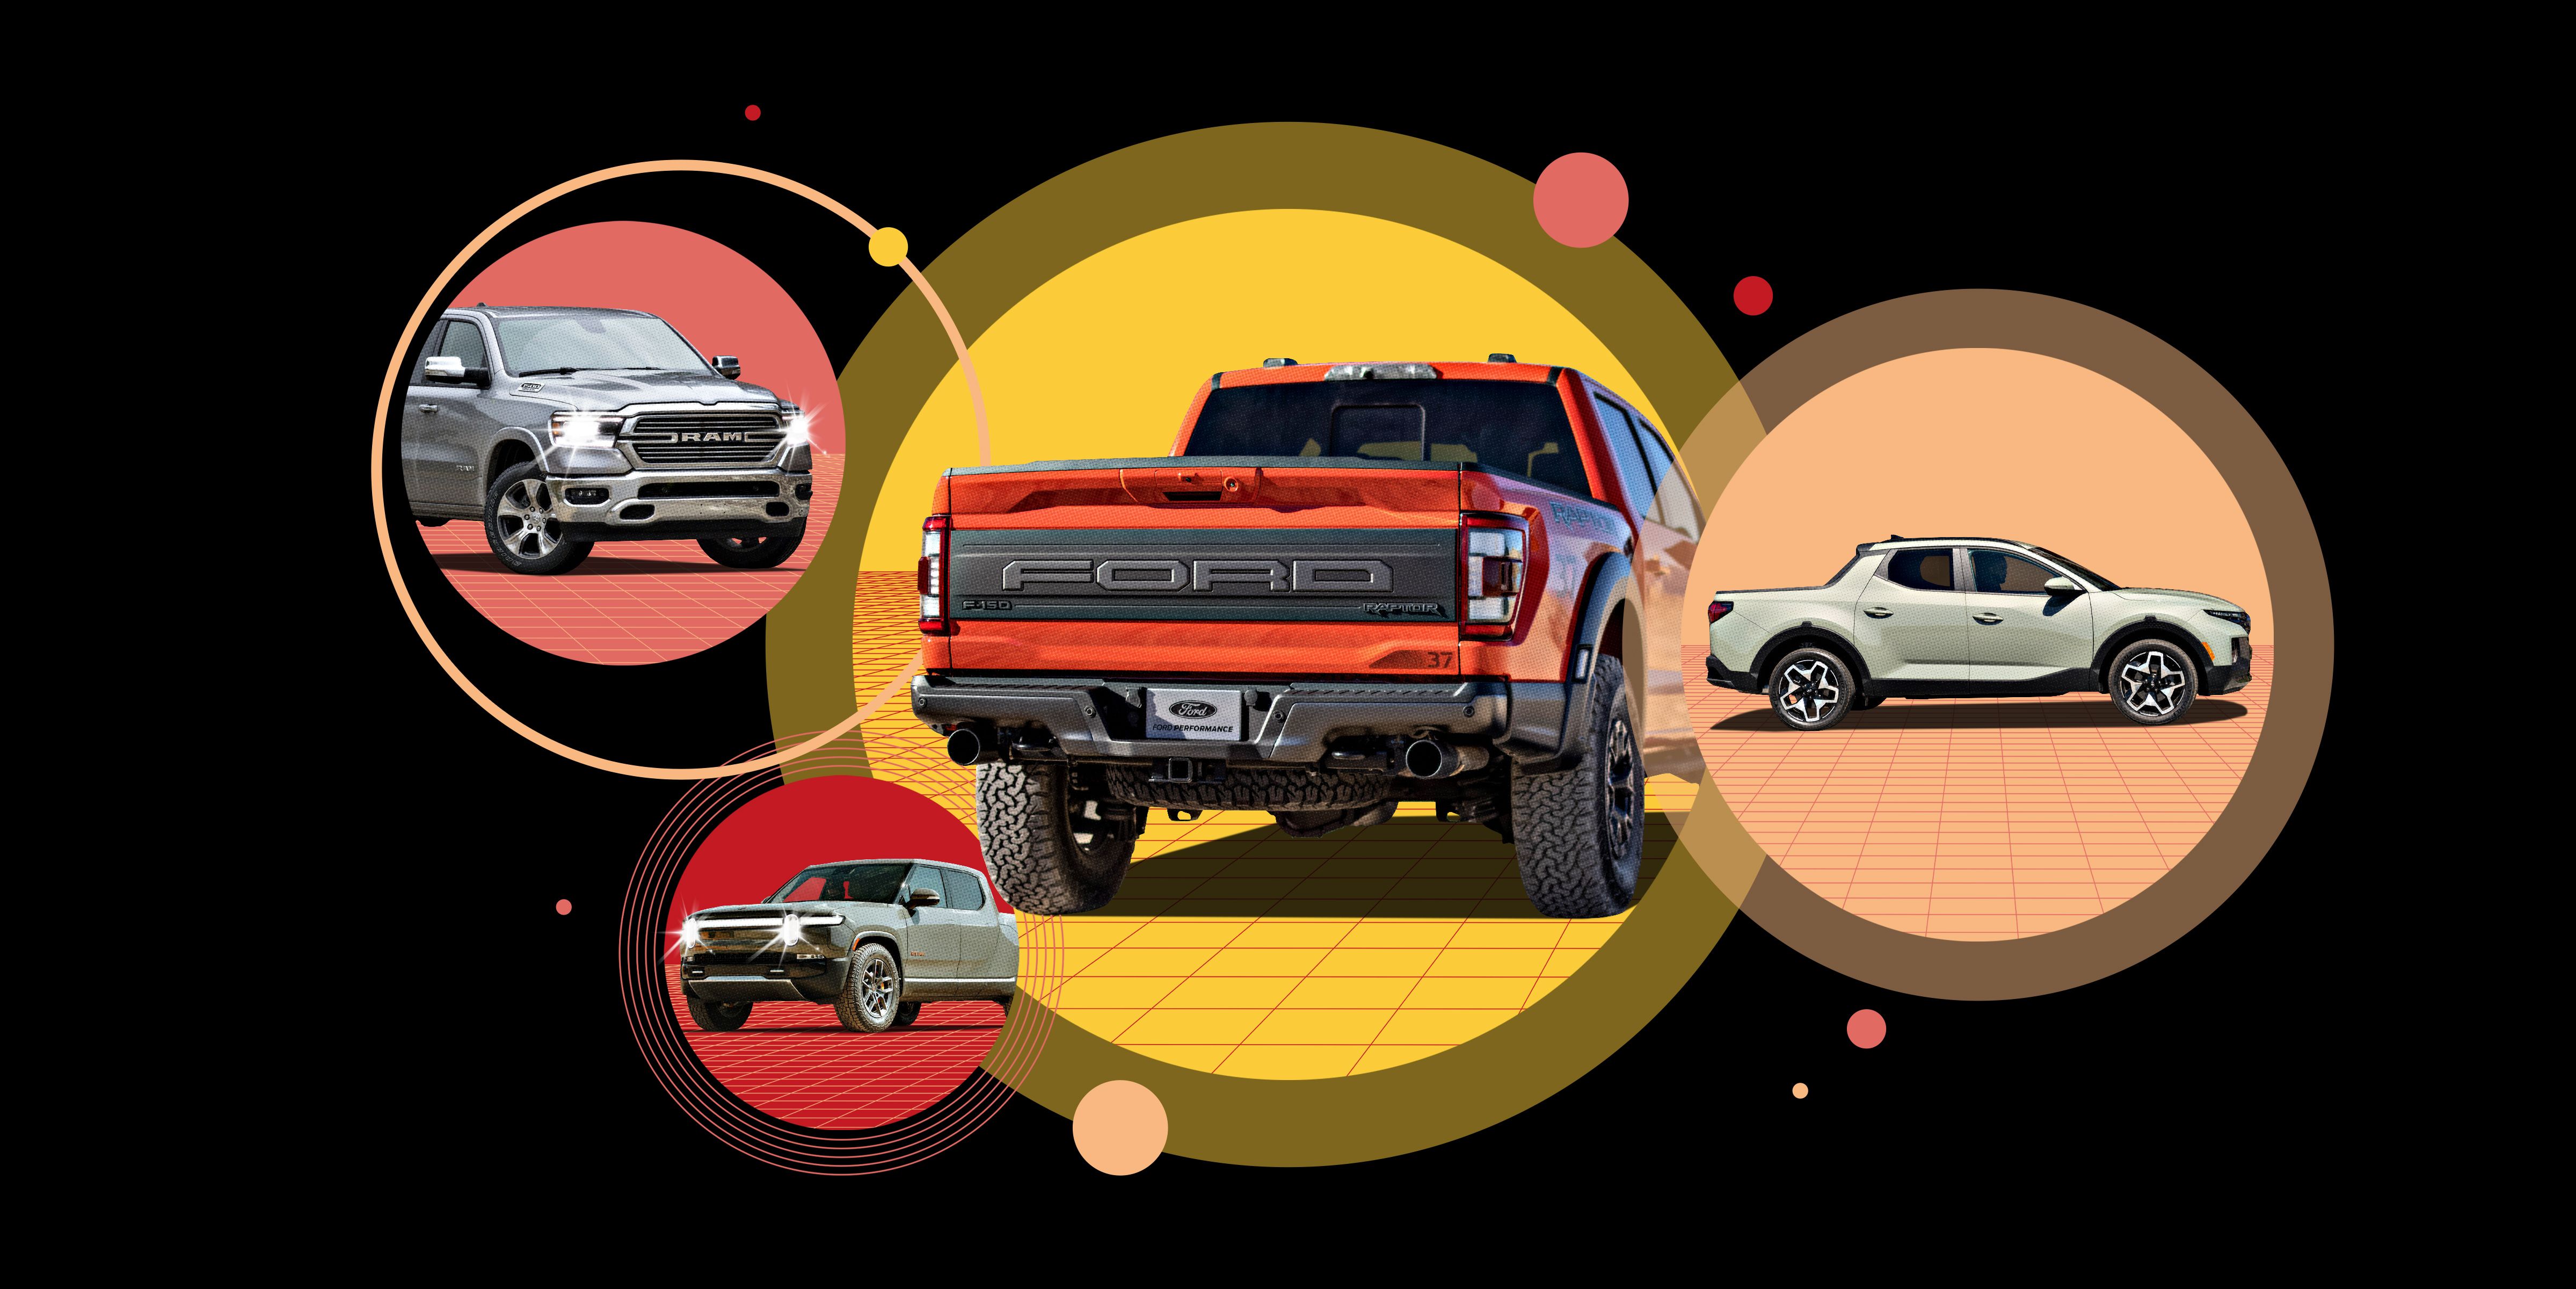 The 20 Best New Off-Road Pickup Trucks and SUVs Money Can Buy